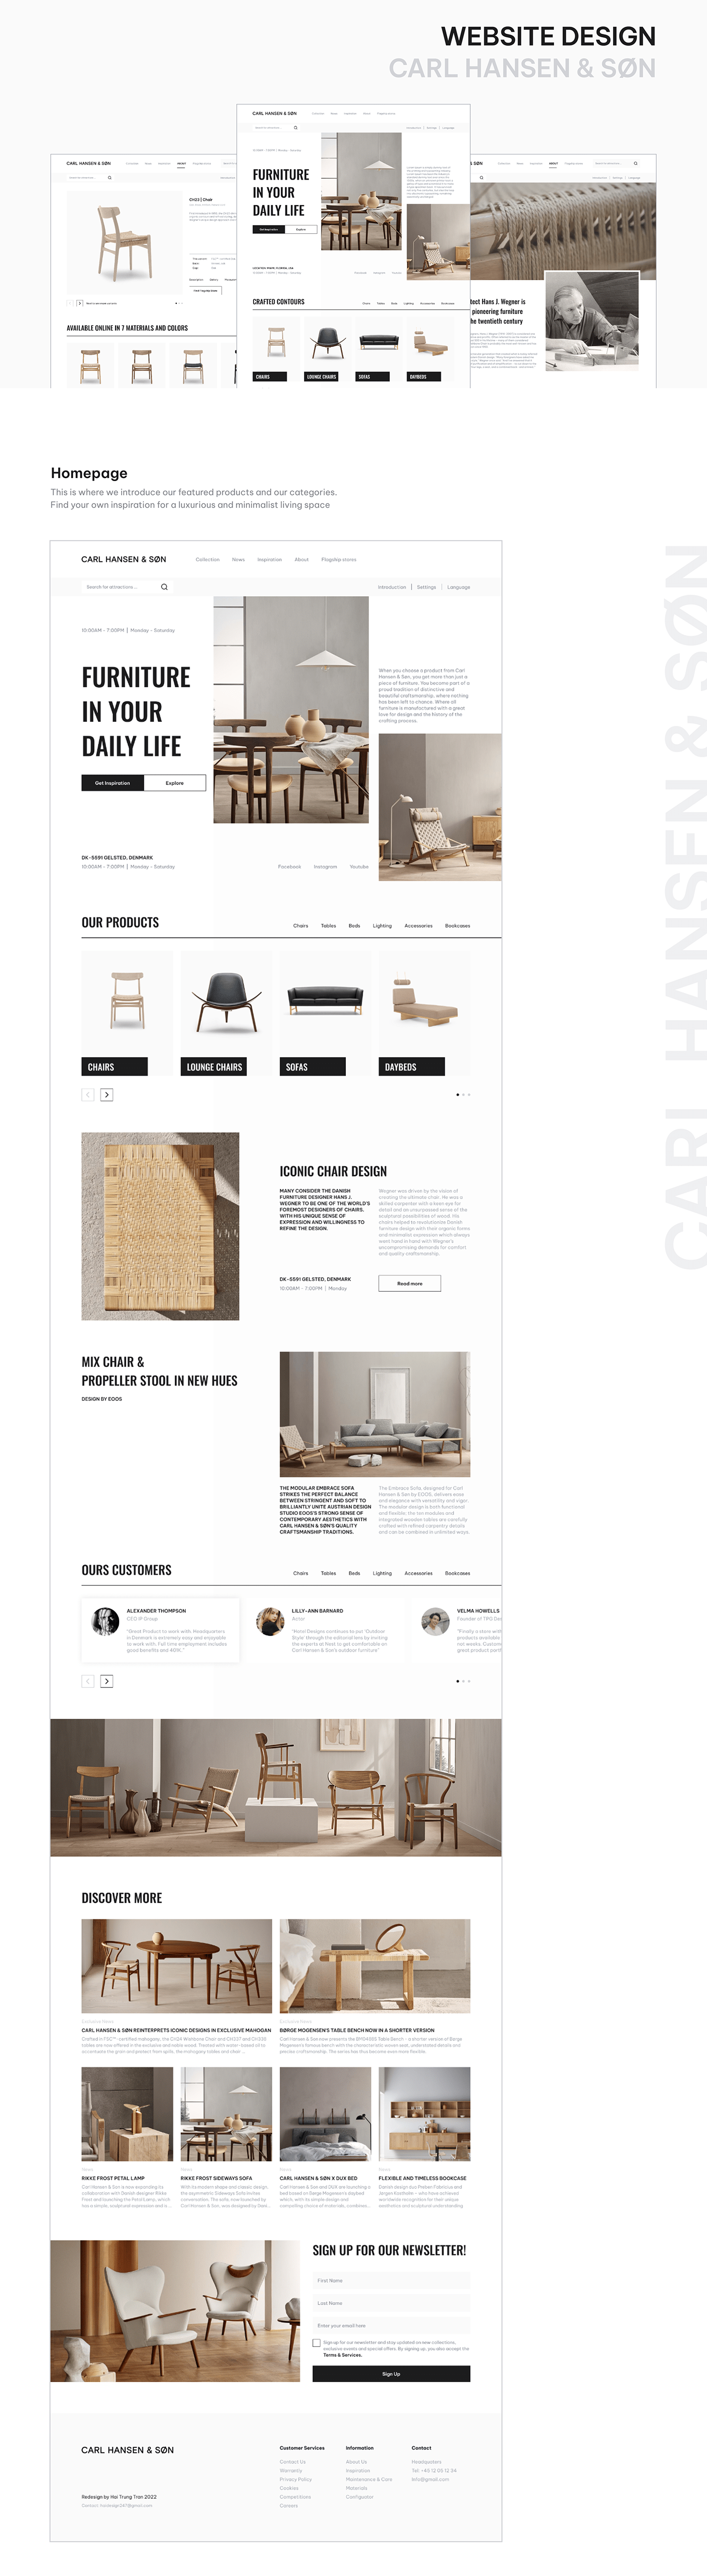 chairs design furniture landing page modern products typography   ui design